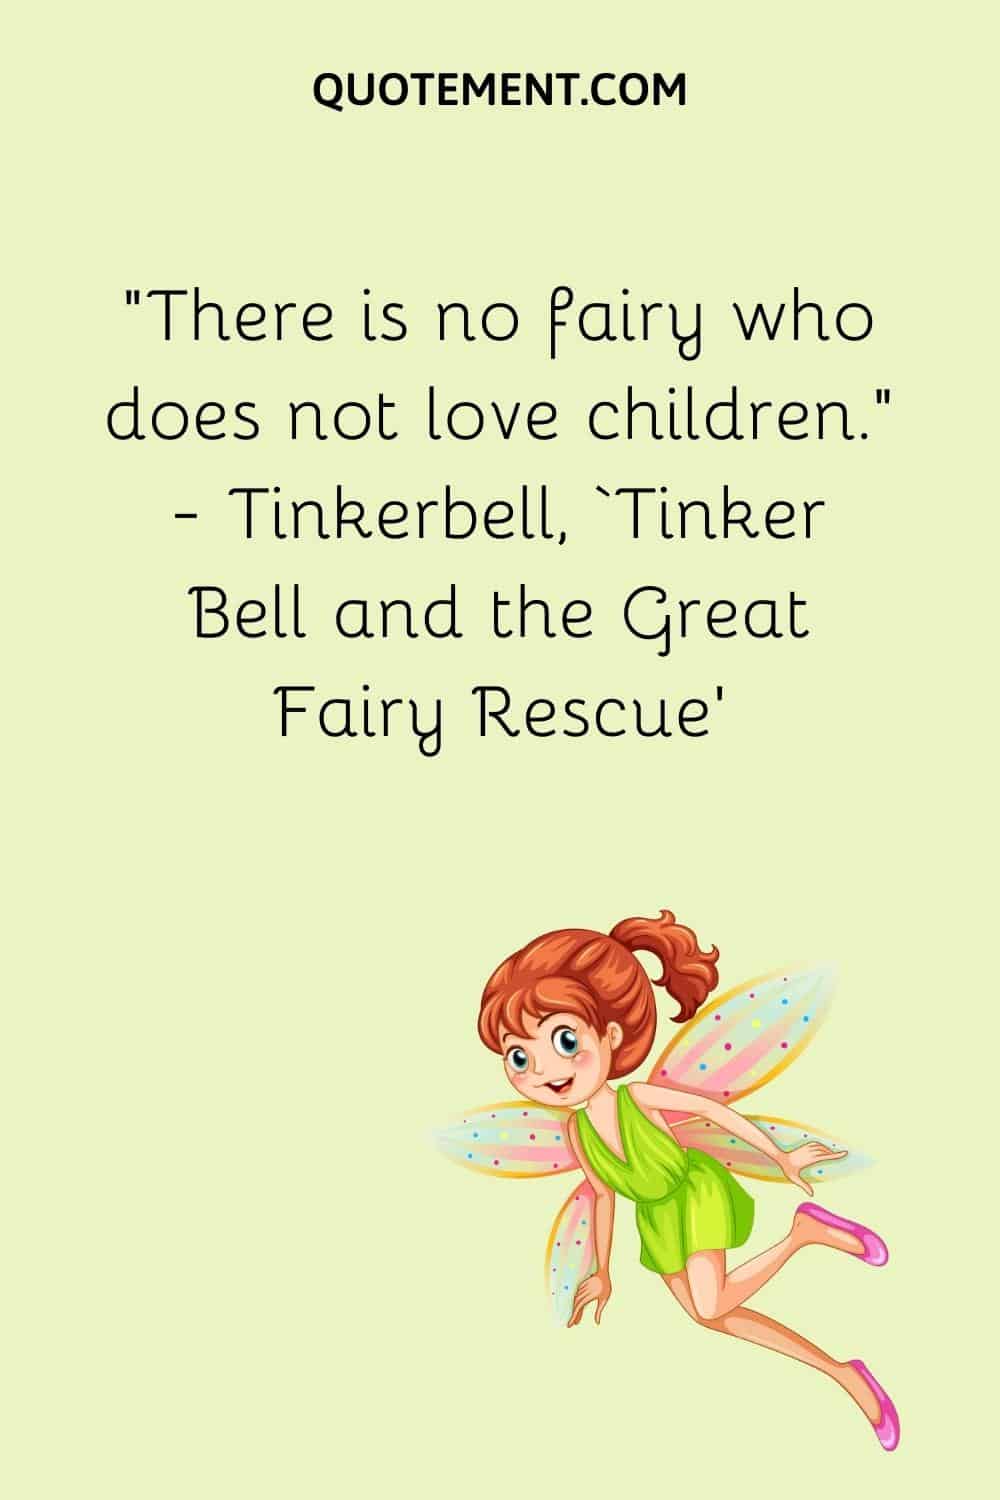 There is no fairy who does not love children.